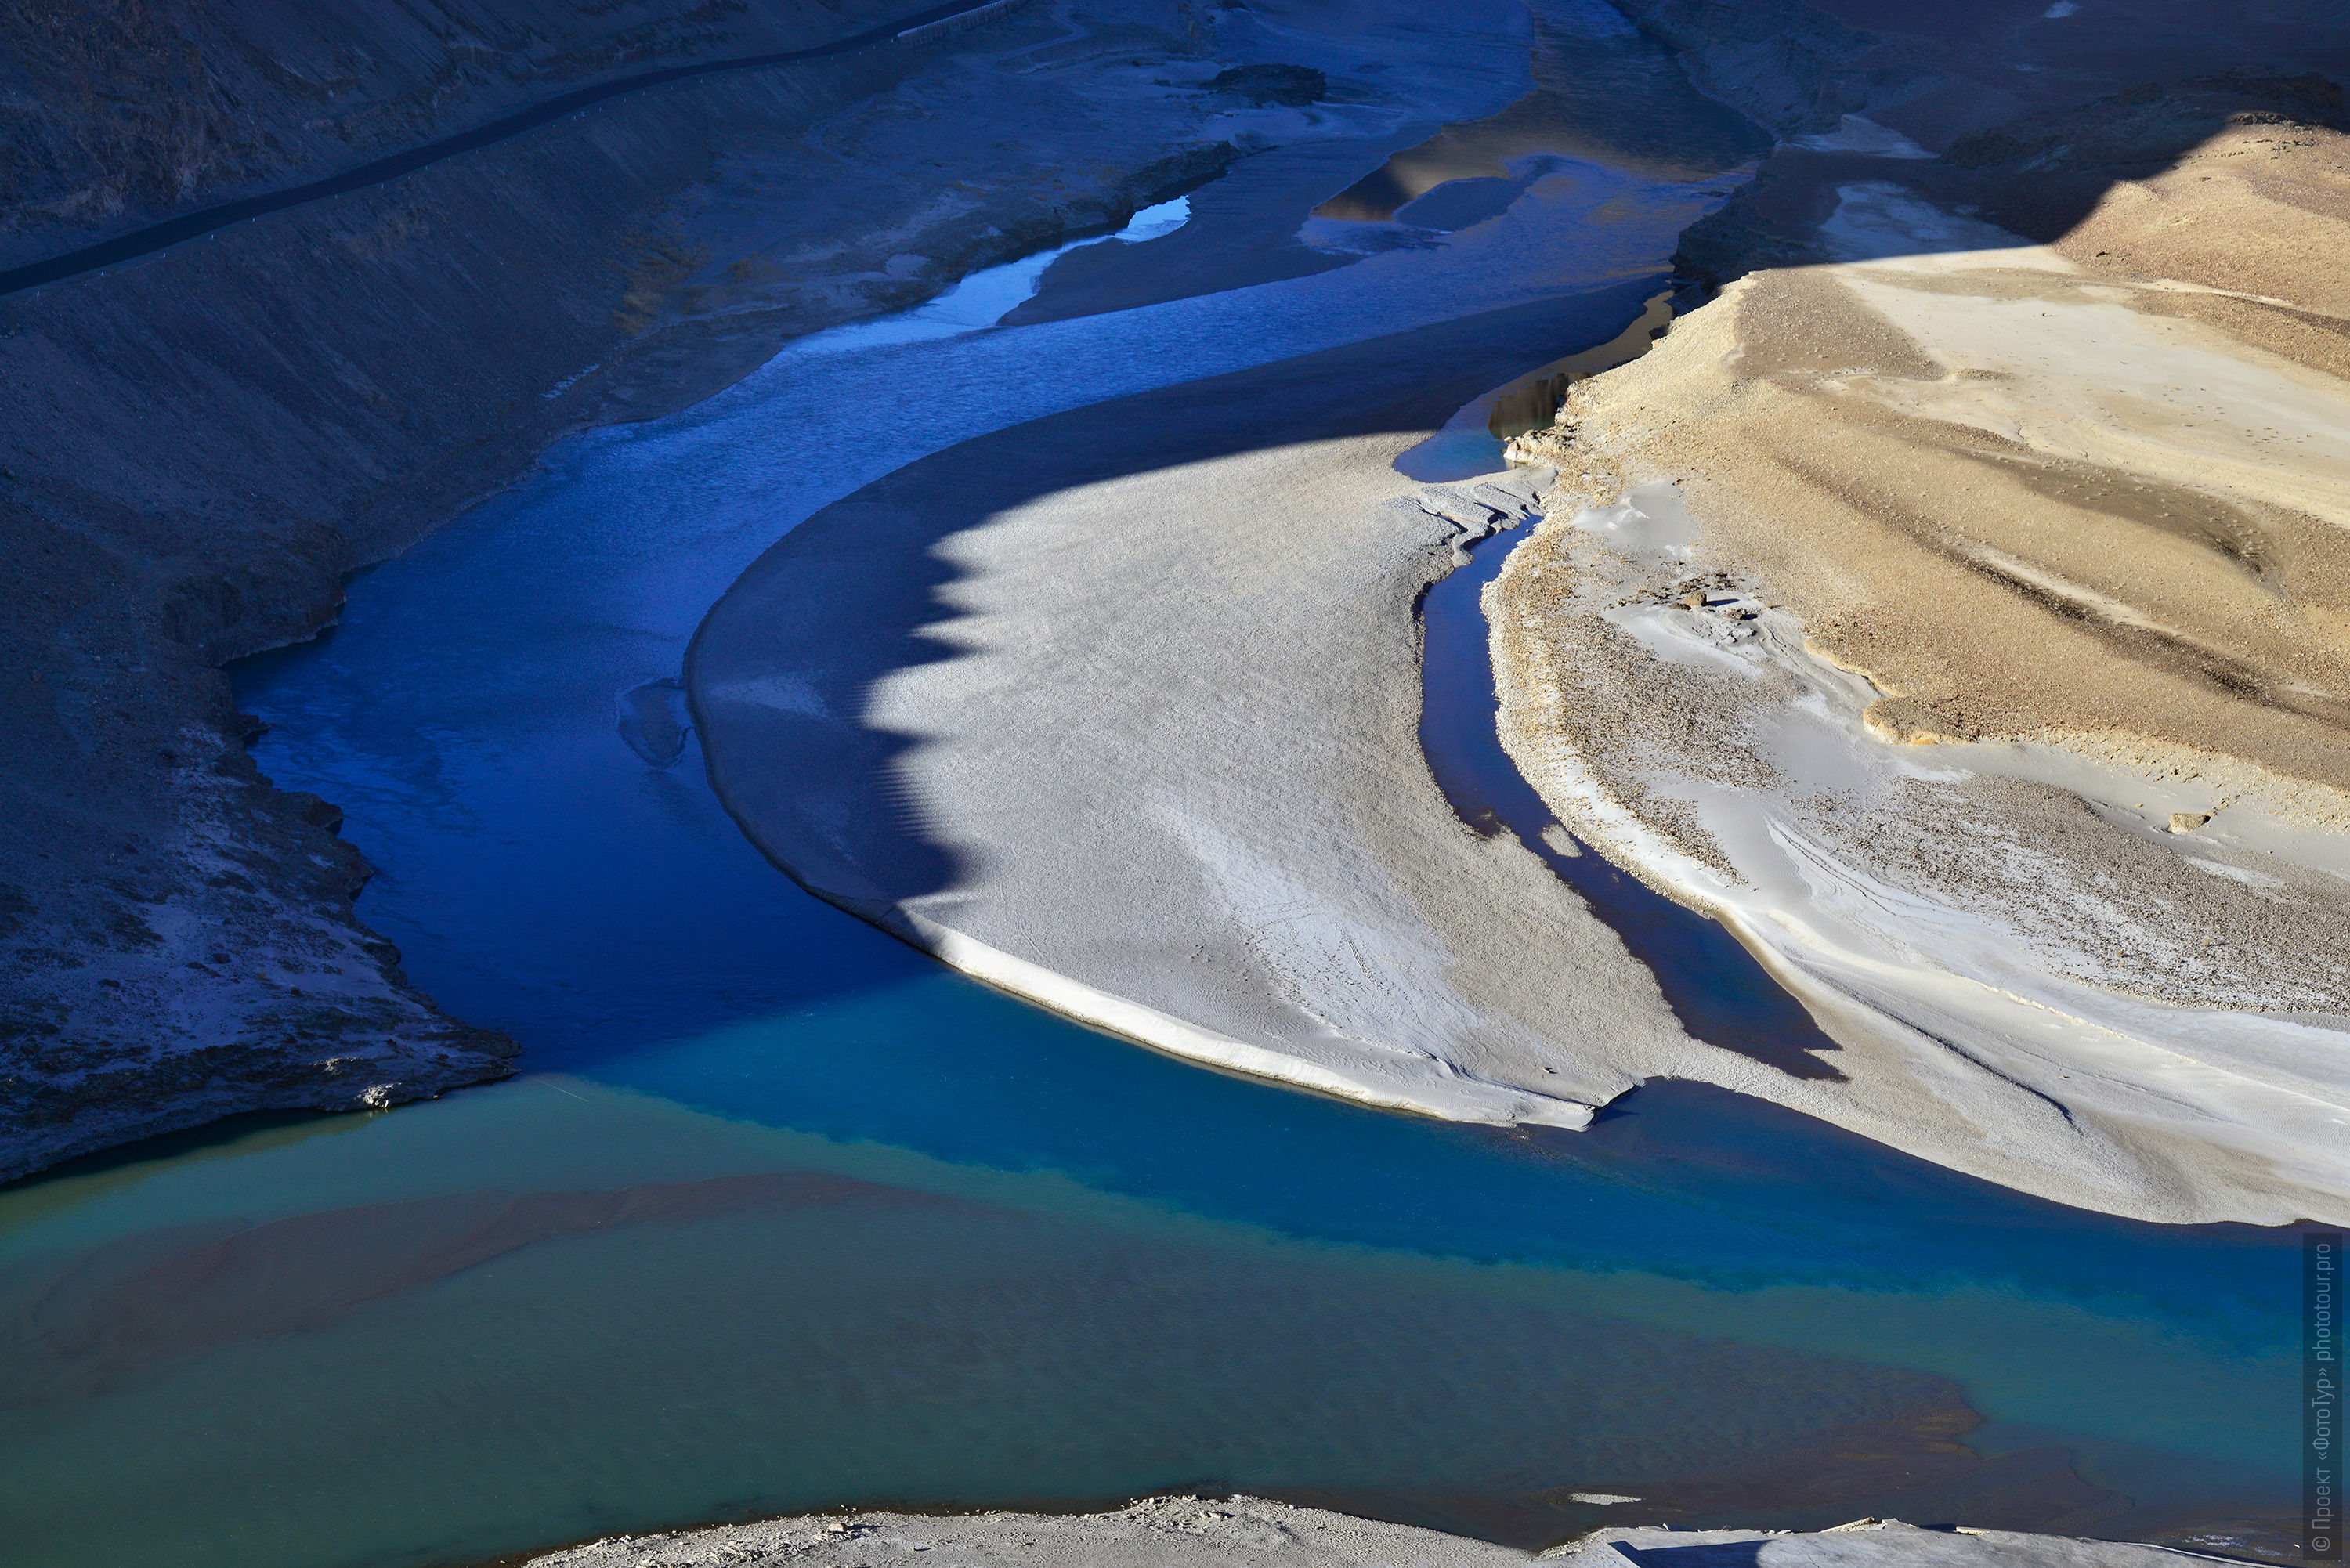 The confluence of the Indus and Zanskar rivers. Photo tour to Tibet for the Winter Mysteries in Ladakh, Stok and Matho monasteries, 01.03. - 03/10/2020